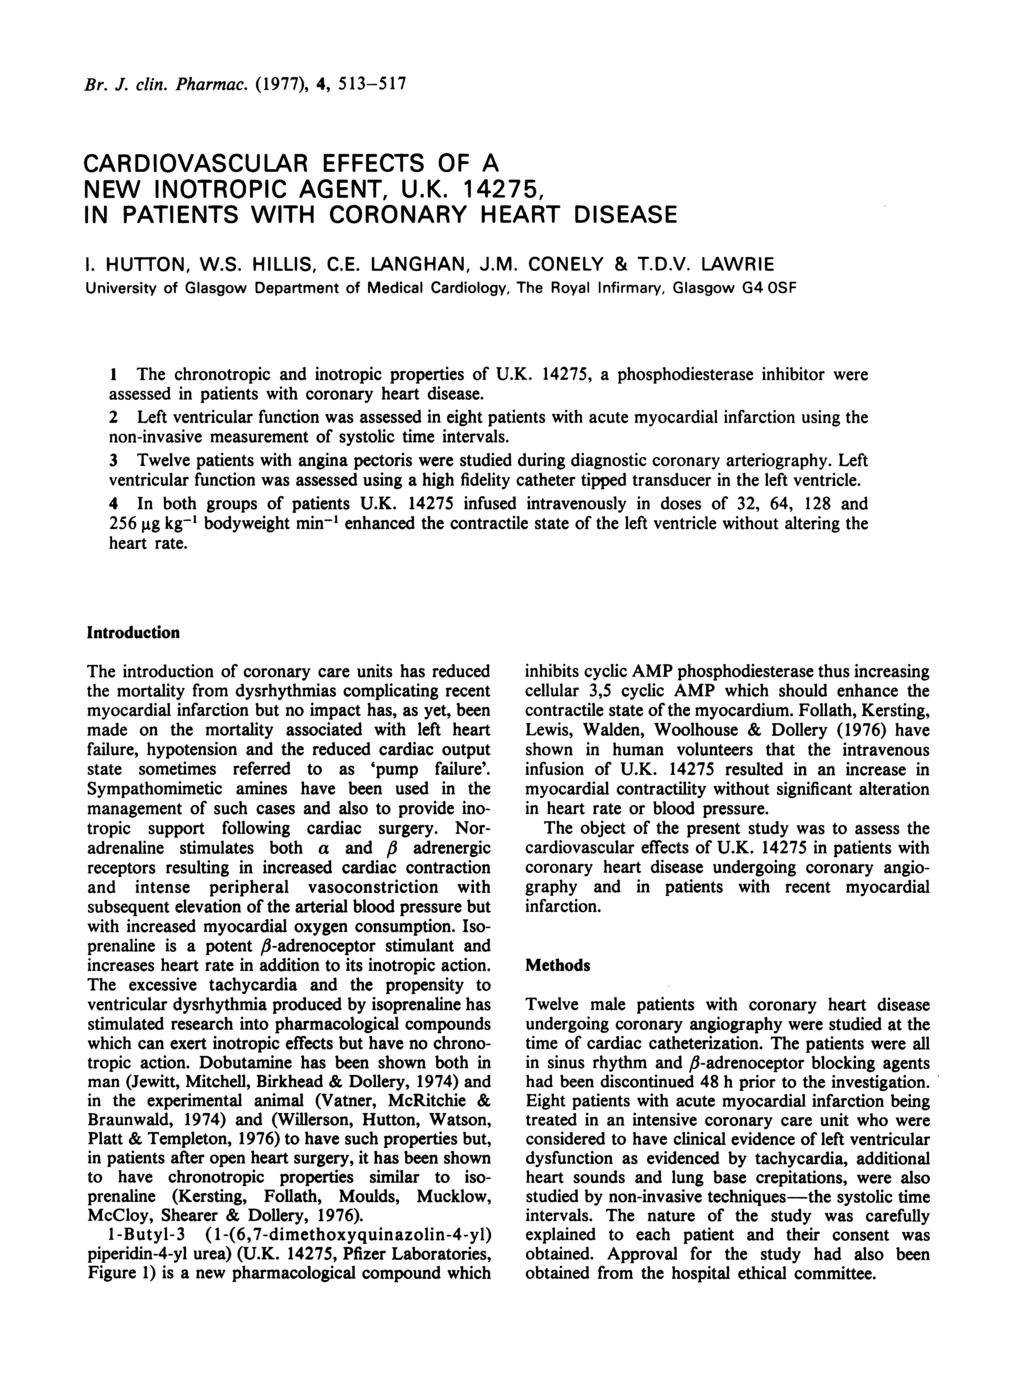 Br. J. lin. Pharma. (1977), 4, 513-517 CRDOVSCULR FFCTS OF W OTROPC GT, U.K. 14275, PTTS WTH CORORY HRT DSS 1. HUTTO, W.S. HLLS, C.. LGH, J.M. COLY & T.D.V. LWR University of Glasgow Department of Medial Cardiology, The Royal nfirmary, Glasgow G4 OSF The hronotropi and inotropi properties of U.